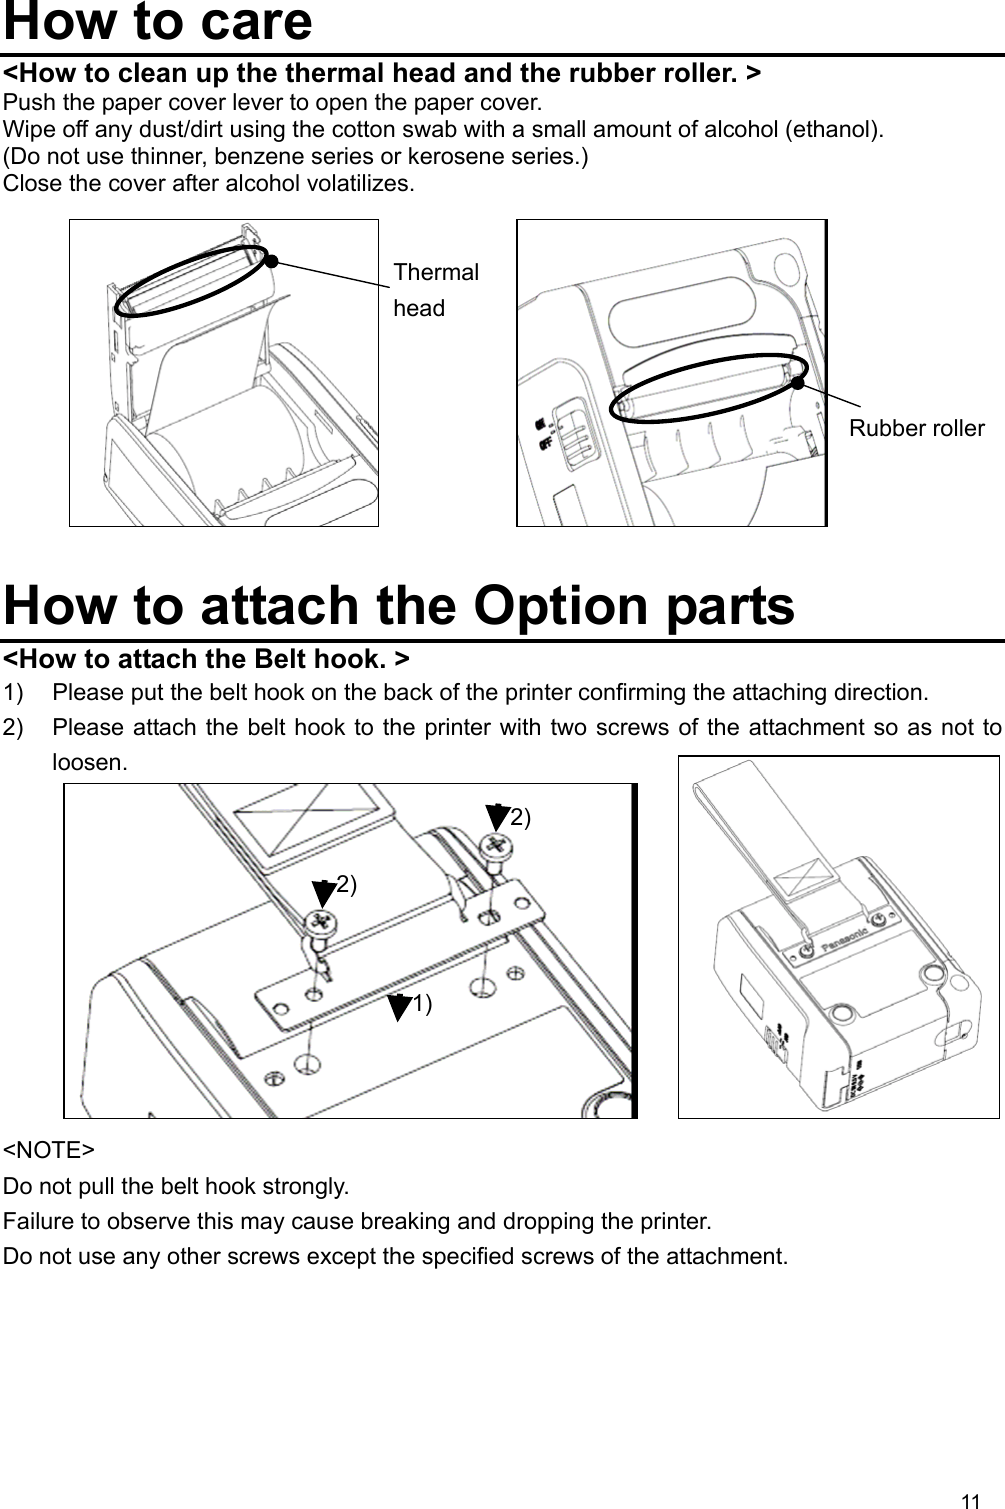 11  How to care &lt;How to clean up the thermal head and the rubber roller. &gt; Push the paper cover lever to open the paper cover. Wipe off any dust/dirt using the cotton swab with a small amount of alcohol (ethanol). (Do not use thinner, benzene series or kerosene series.) Close the cover after alcohol volatilizes.            How to attach the Option parts &lt;How to attach the Belt hook. &gt; 1)  Please put the belt hook on the back of the printer confirming the attaching direction. 2)  Please attach the belt hook to the printer with two screws of the attachment so as not to loosen.           &lt;NOTE&gt; Do not pull the belt hook strongly.   Failure to observe this may cause breaking and dropping the printer. Do not use any other screws except the specified screws of the attachment. Thermal head Rubber roller1) 2) 2) 